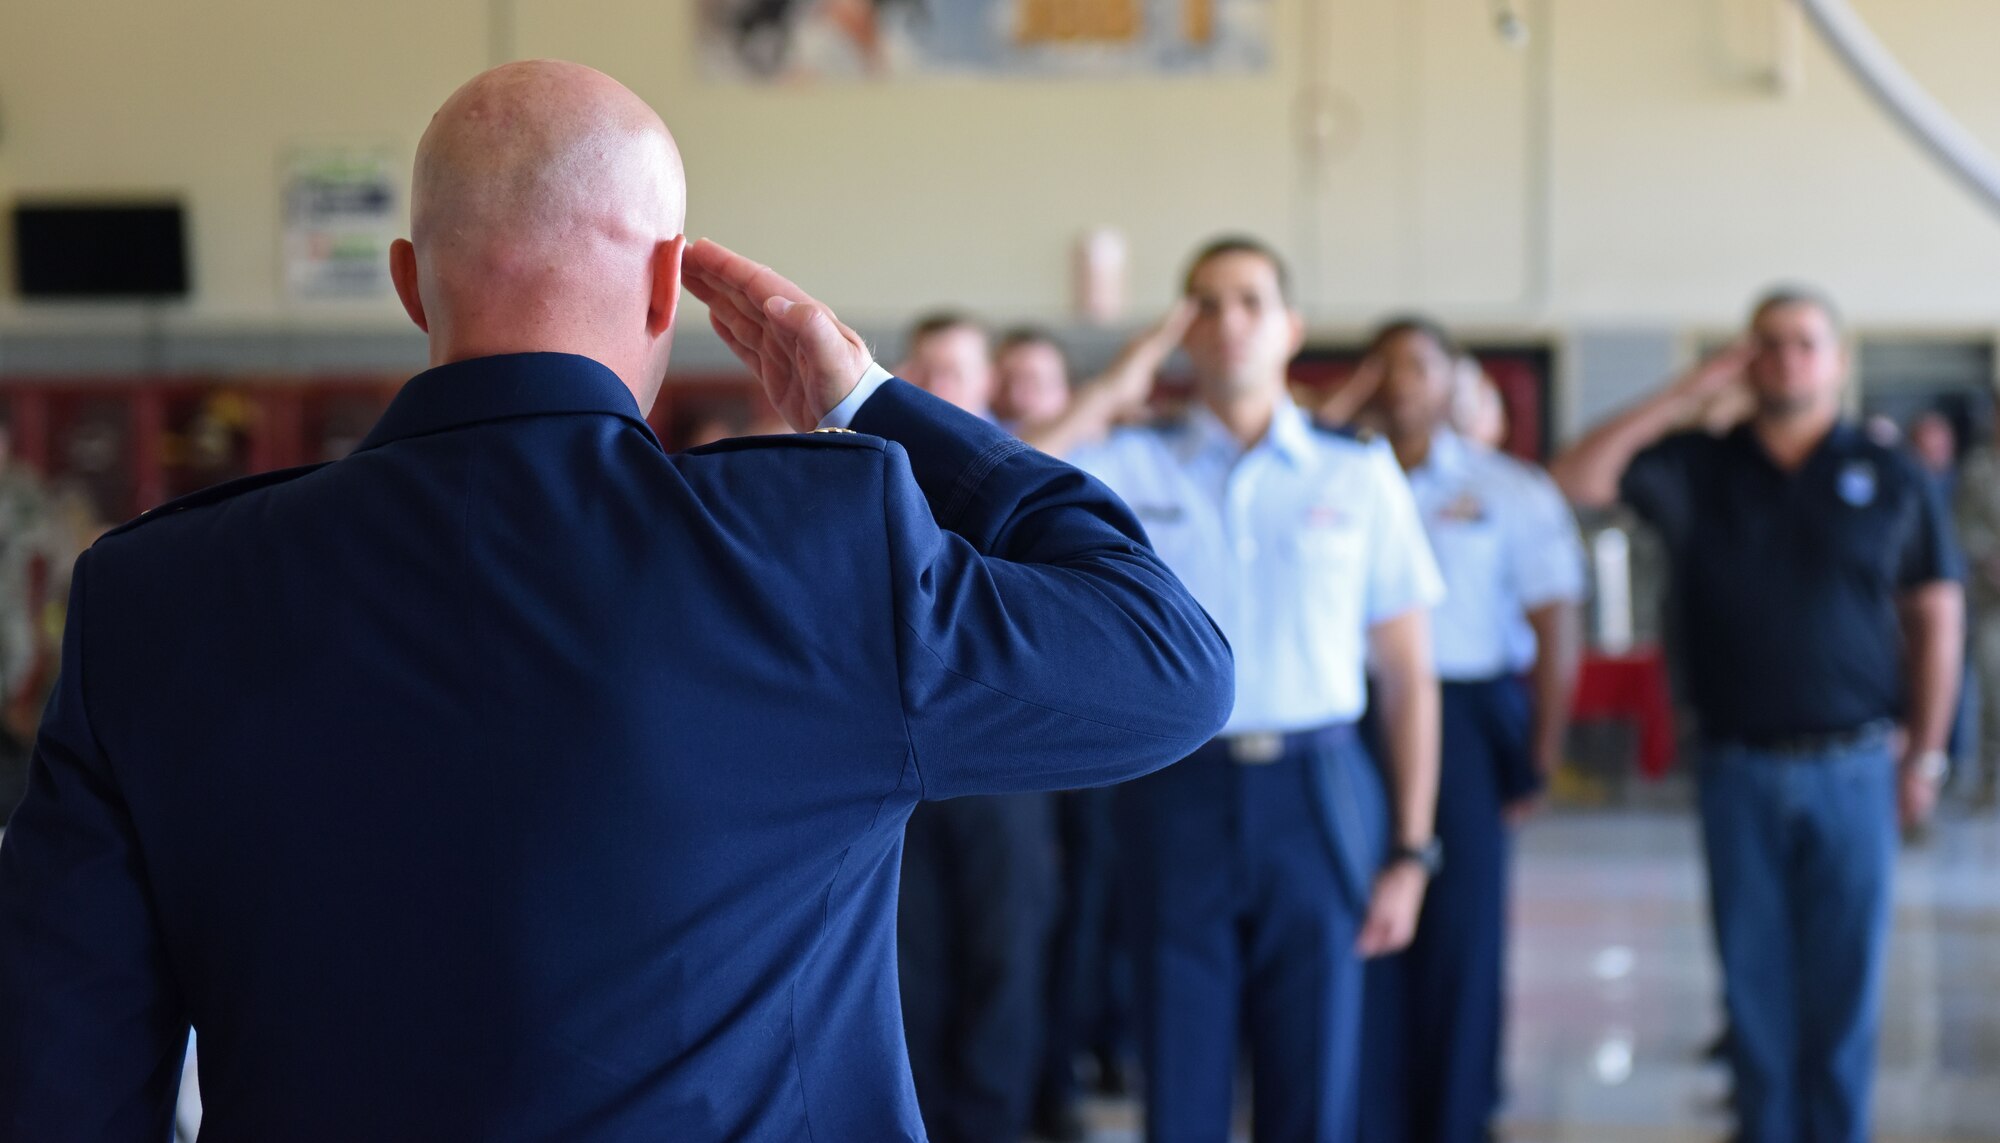 Members of the 17th Civil Engineer Squadron salute their incoming commander, U.S. Air Force Maj. Joshua Carroll, during the 17th CES change of command ceremony at Goodfellow Air Force Base, Texas, June 17, 2022. The mission for the 17th CES is to provide the quality facilities, infrastructure, and customer service necessary to produce fire protection and intelligence, surveillance, and reconnaissance professionals.